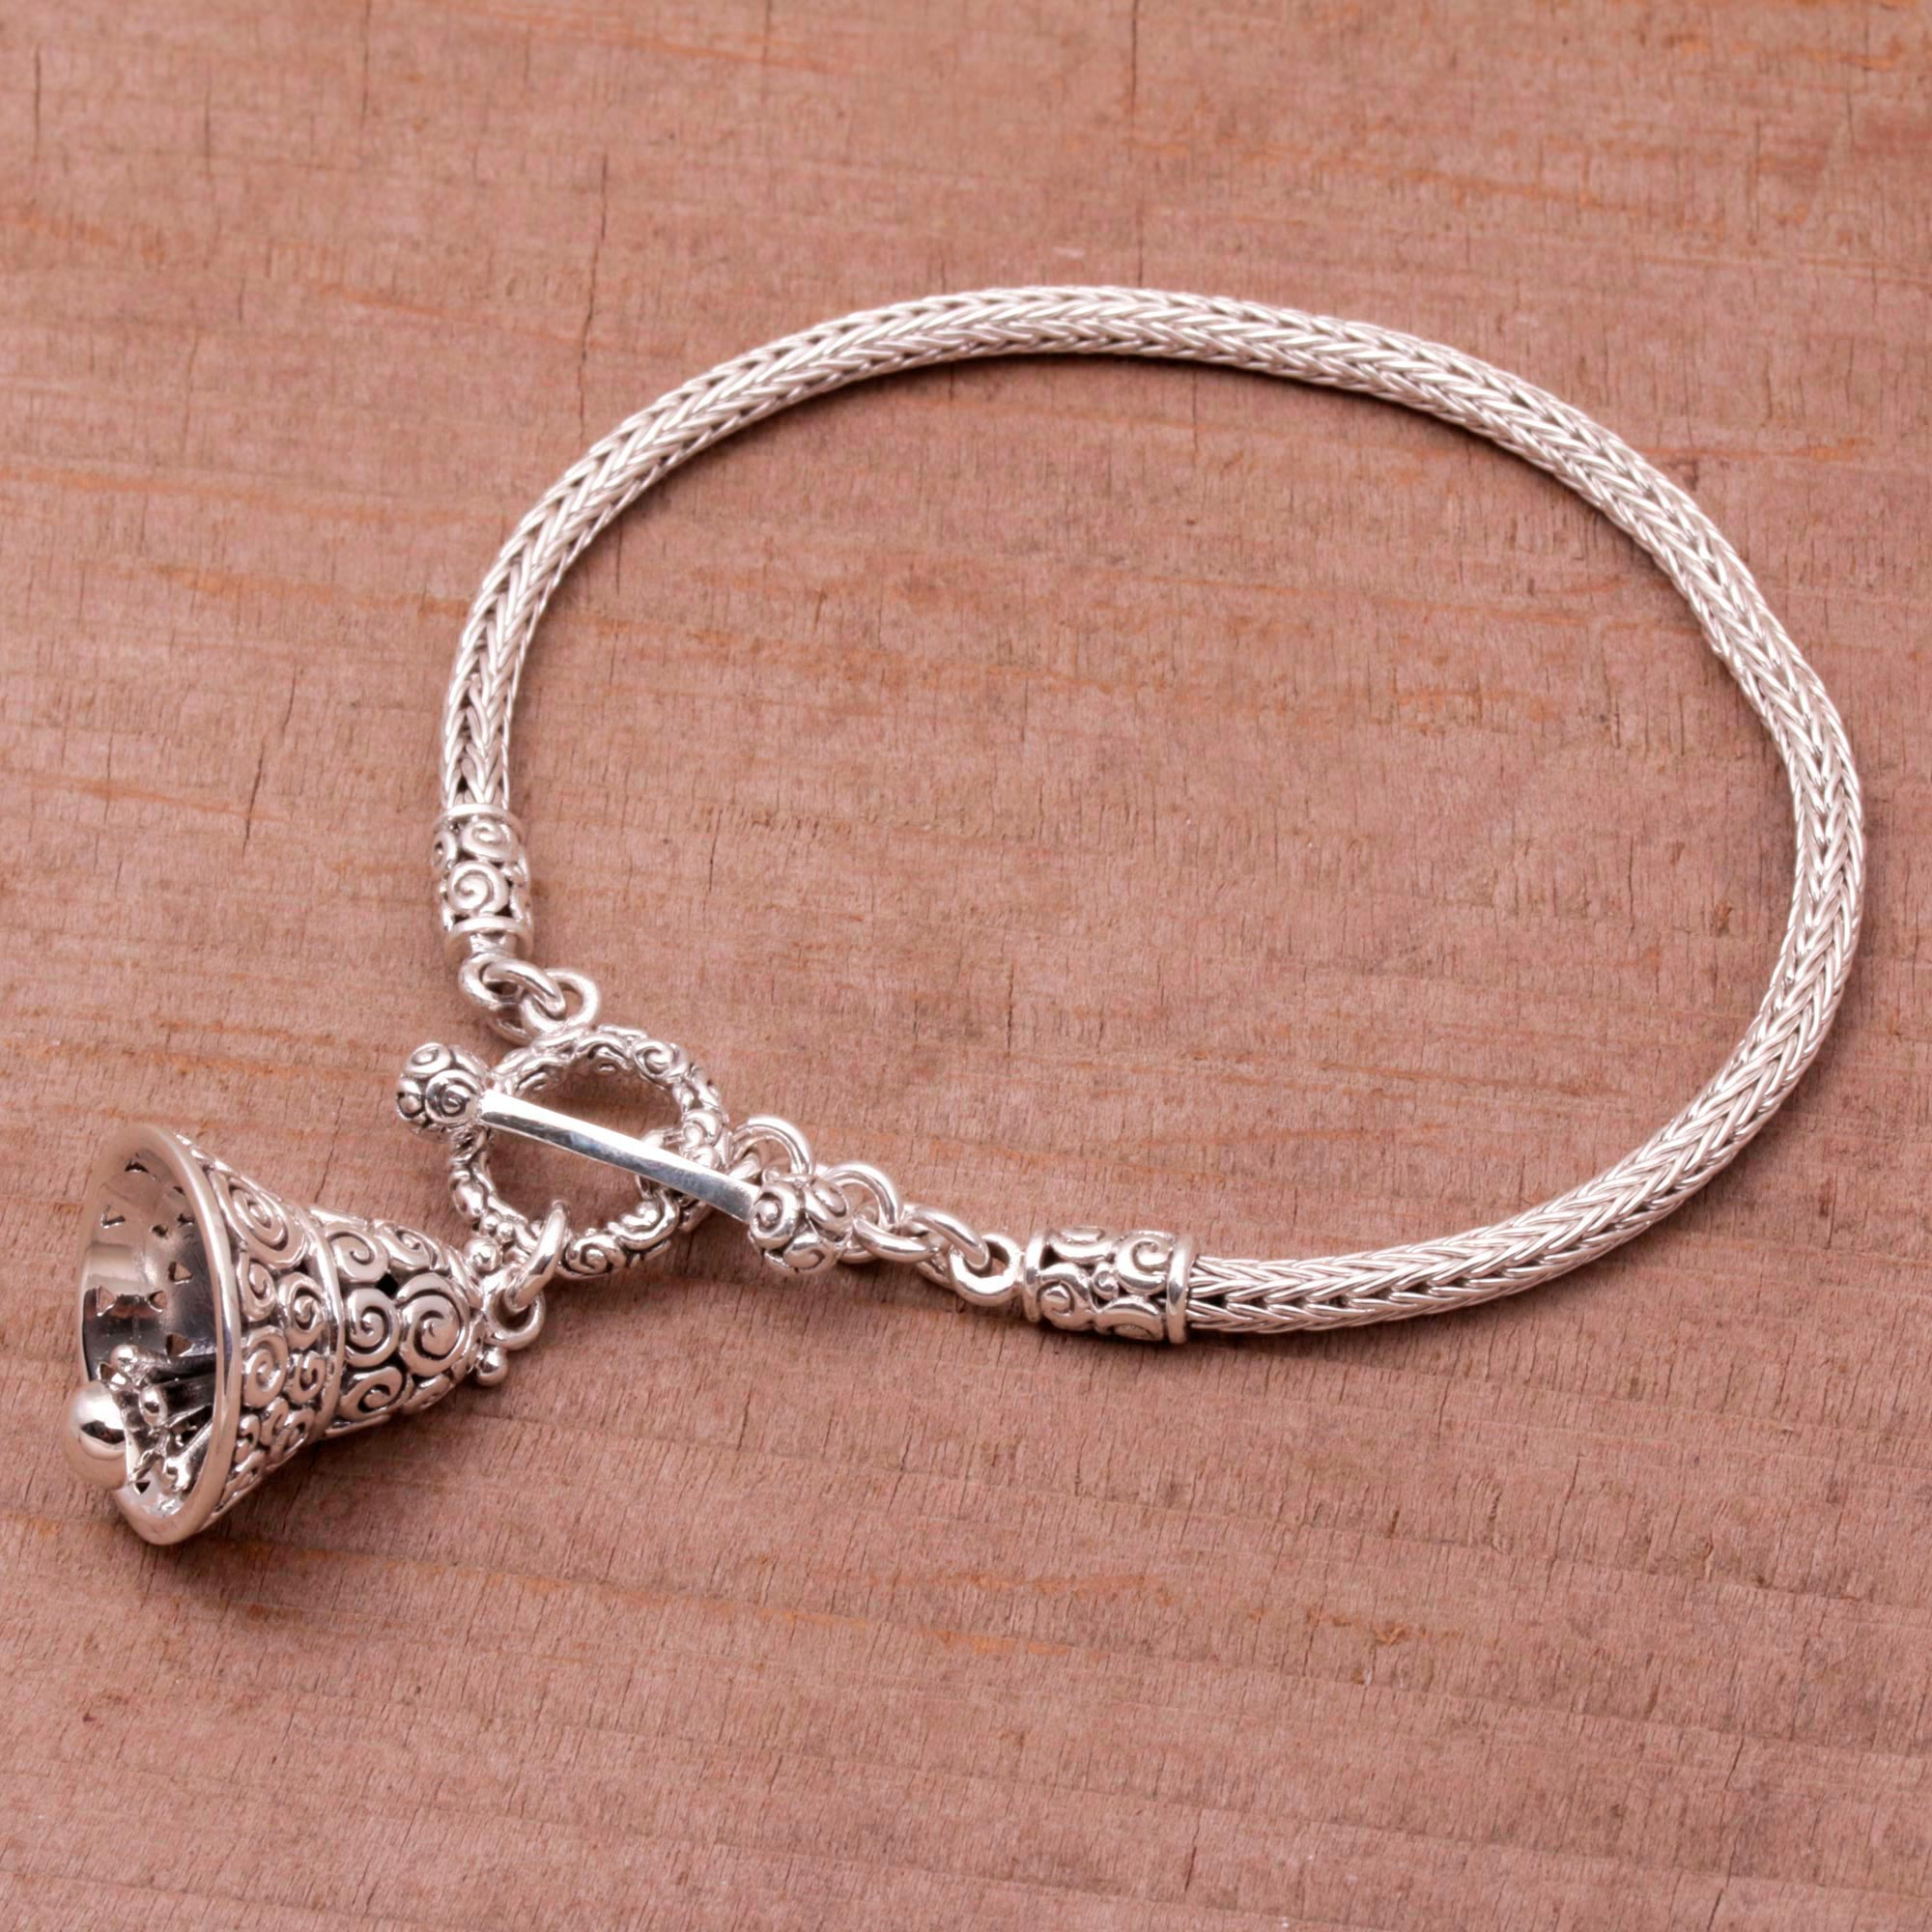 Handmade Sterling Silver Charm Bracelet from Bail - Tiny Bell in Silver